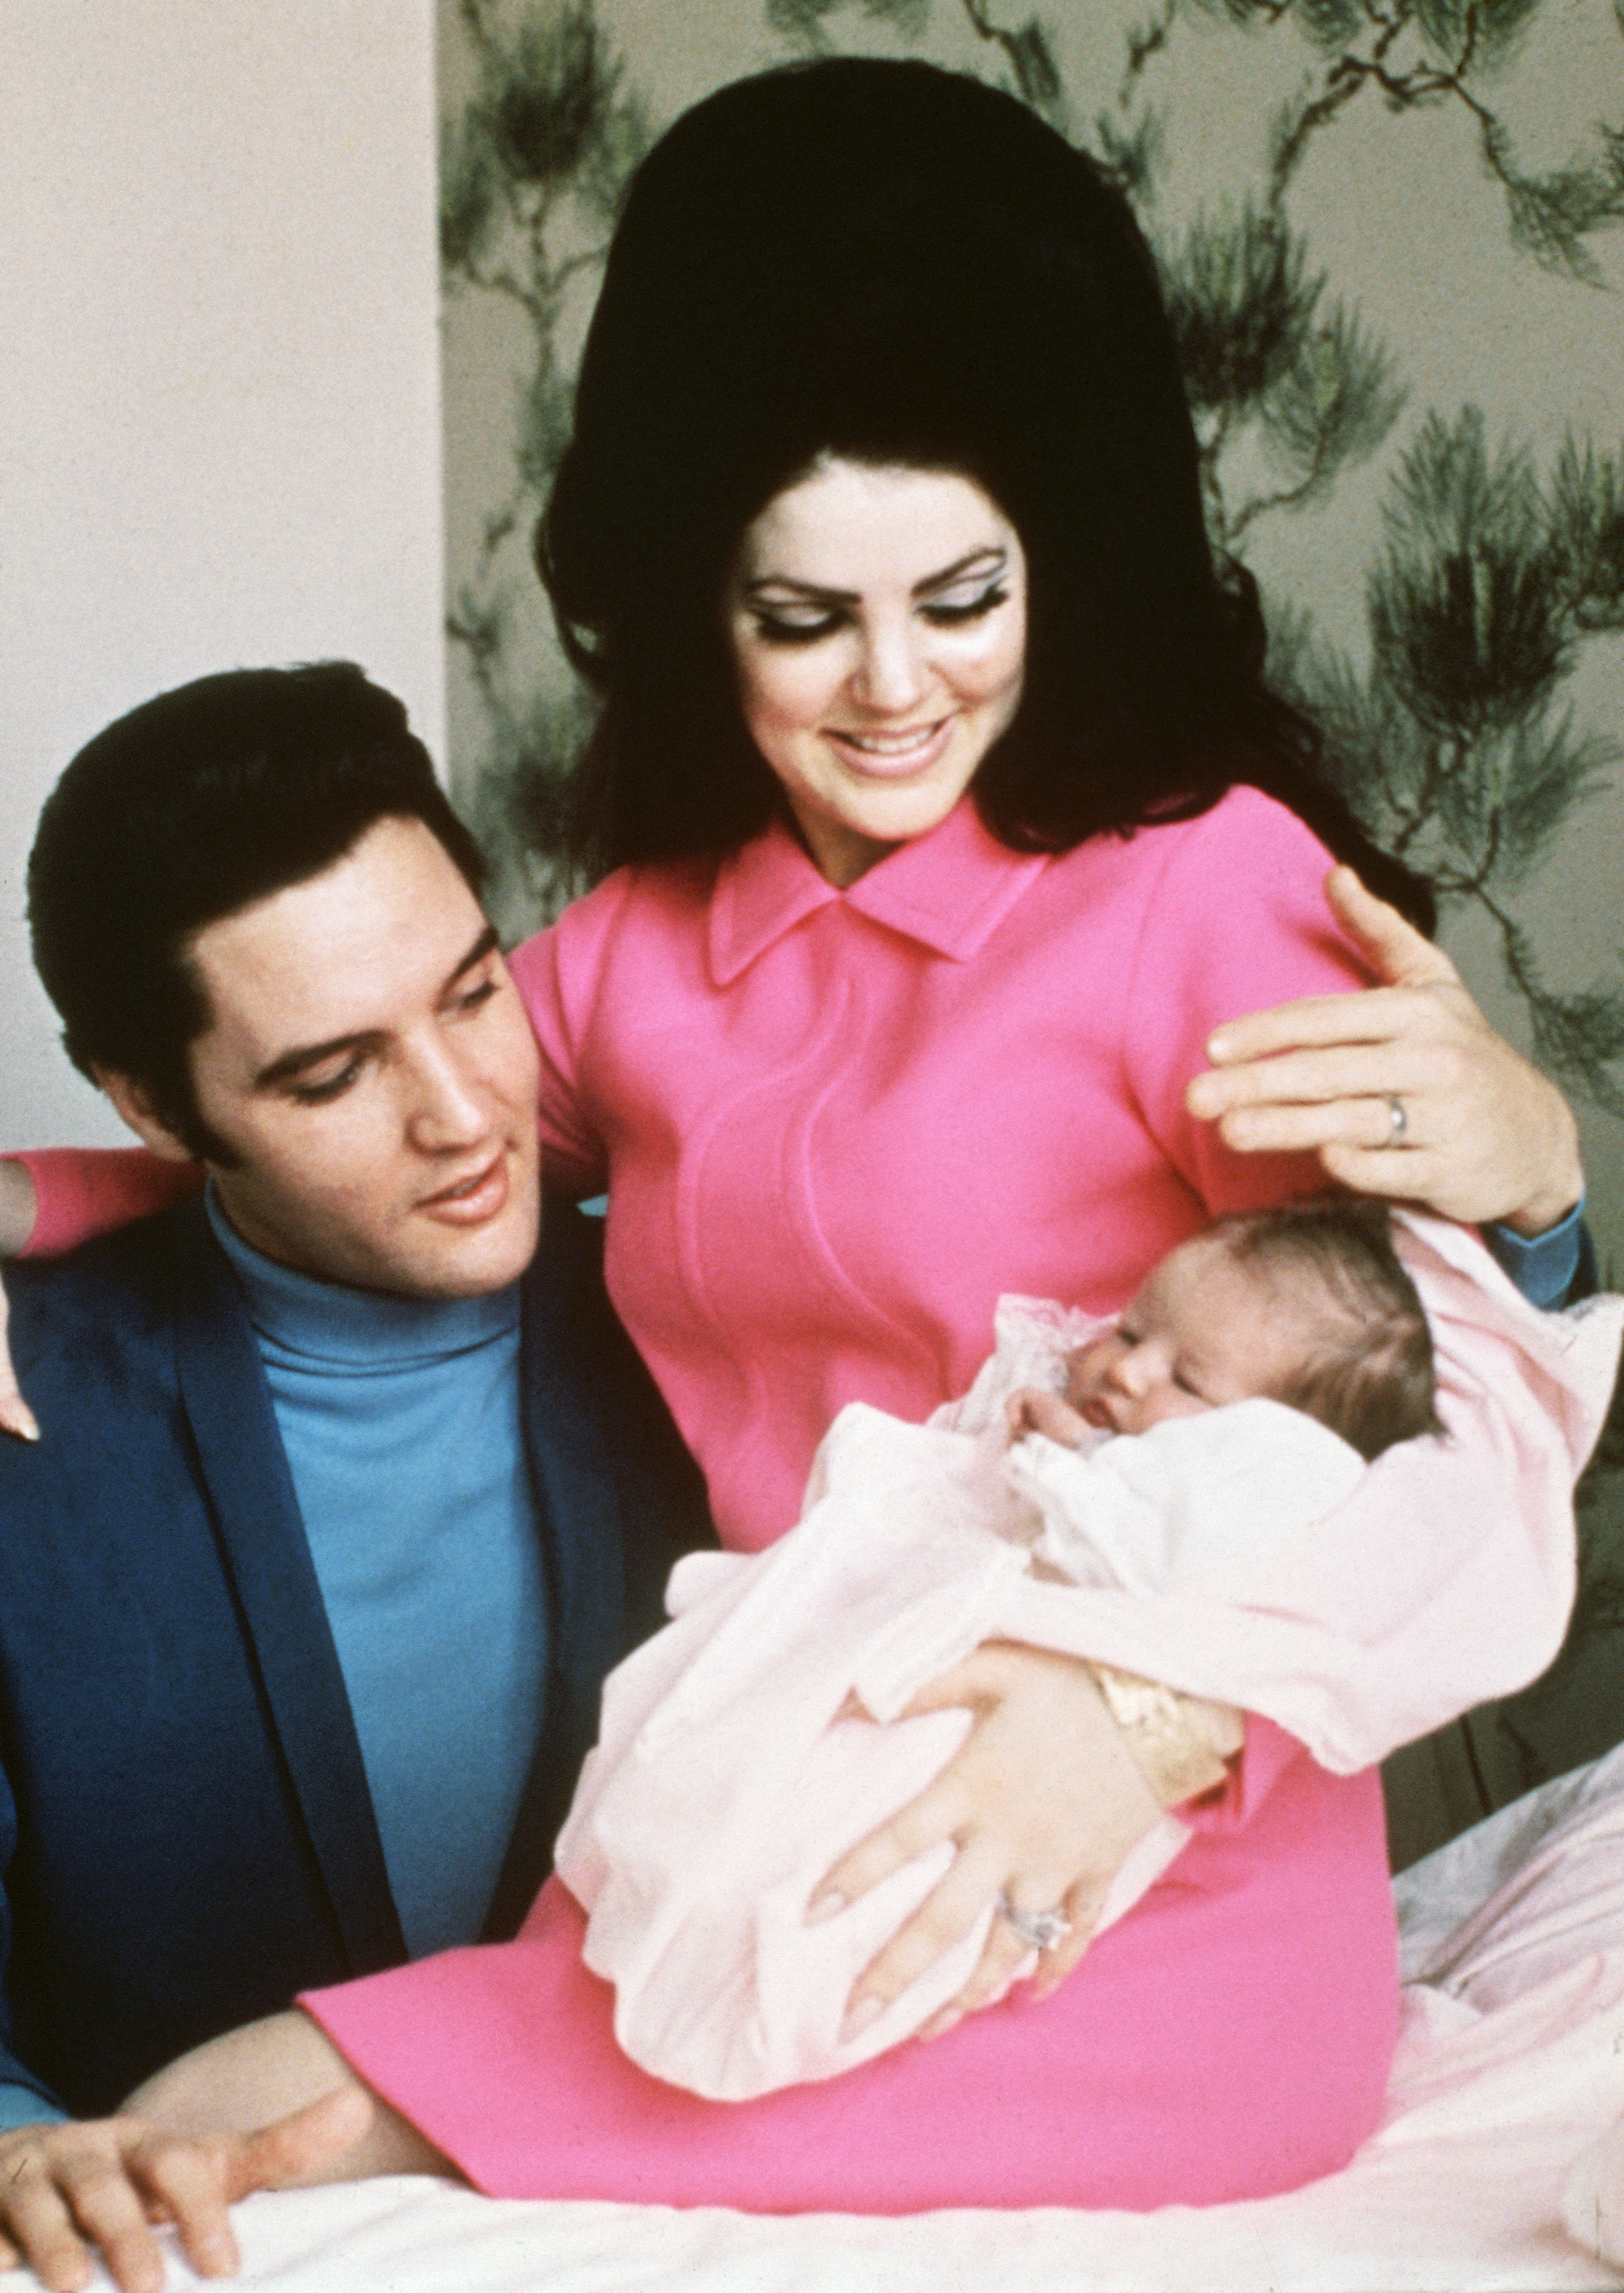 Elvis Presley pictured with his wife Priscilla as they prepared to leave hospital with their daughter, Lisa Marie in 1968.